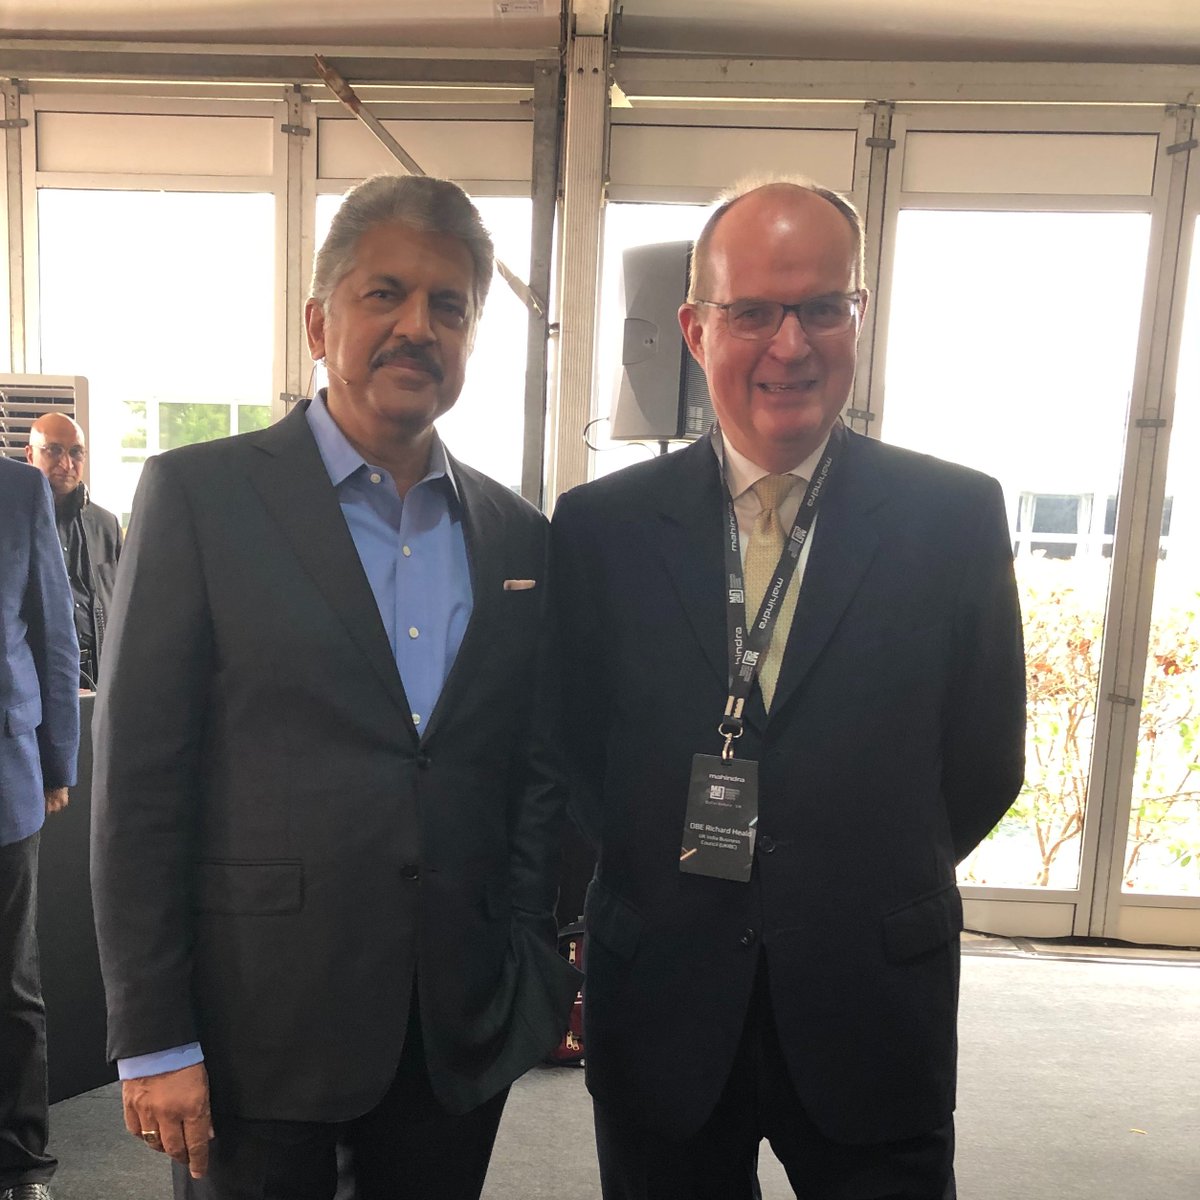 UKIBC Executive Chair @healdrp with @anandmahindra at the inauguration of @MahindraRise's new design centre of excellence, Mahindra Advanced Design Europe (M.A.D.E) in Banbury, Oxfordshire today. Amazing talent and technology and a great UK-India collaboration.